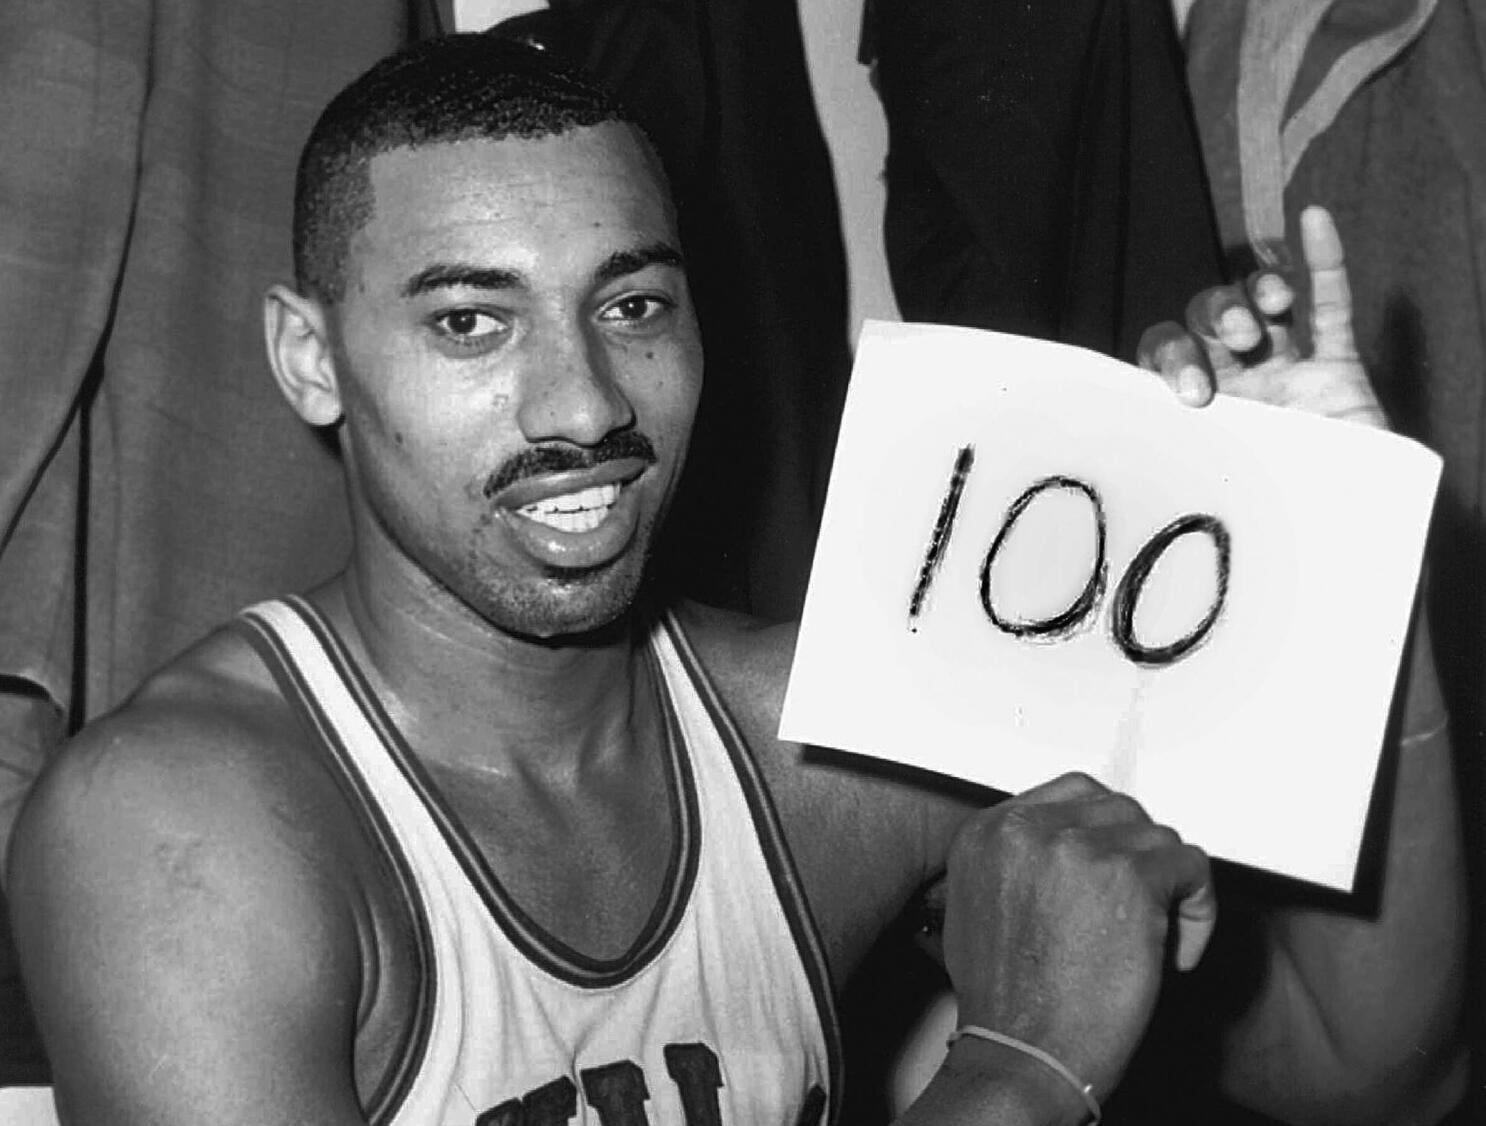 Remembering 'Wilt the Stilt' Chamberlain and his 100-point game in Hershey  in 1962 